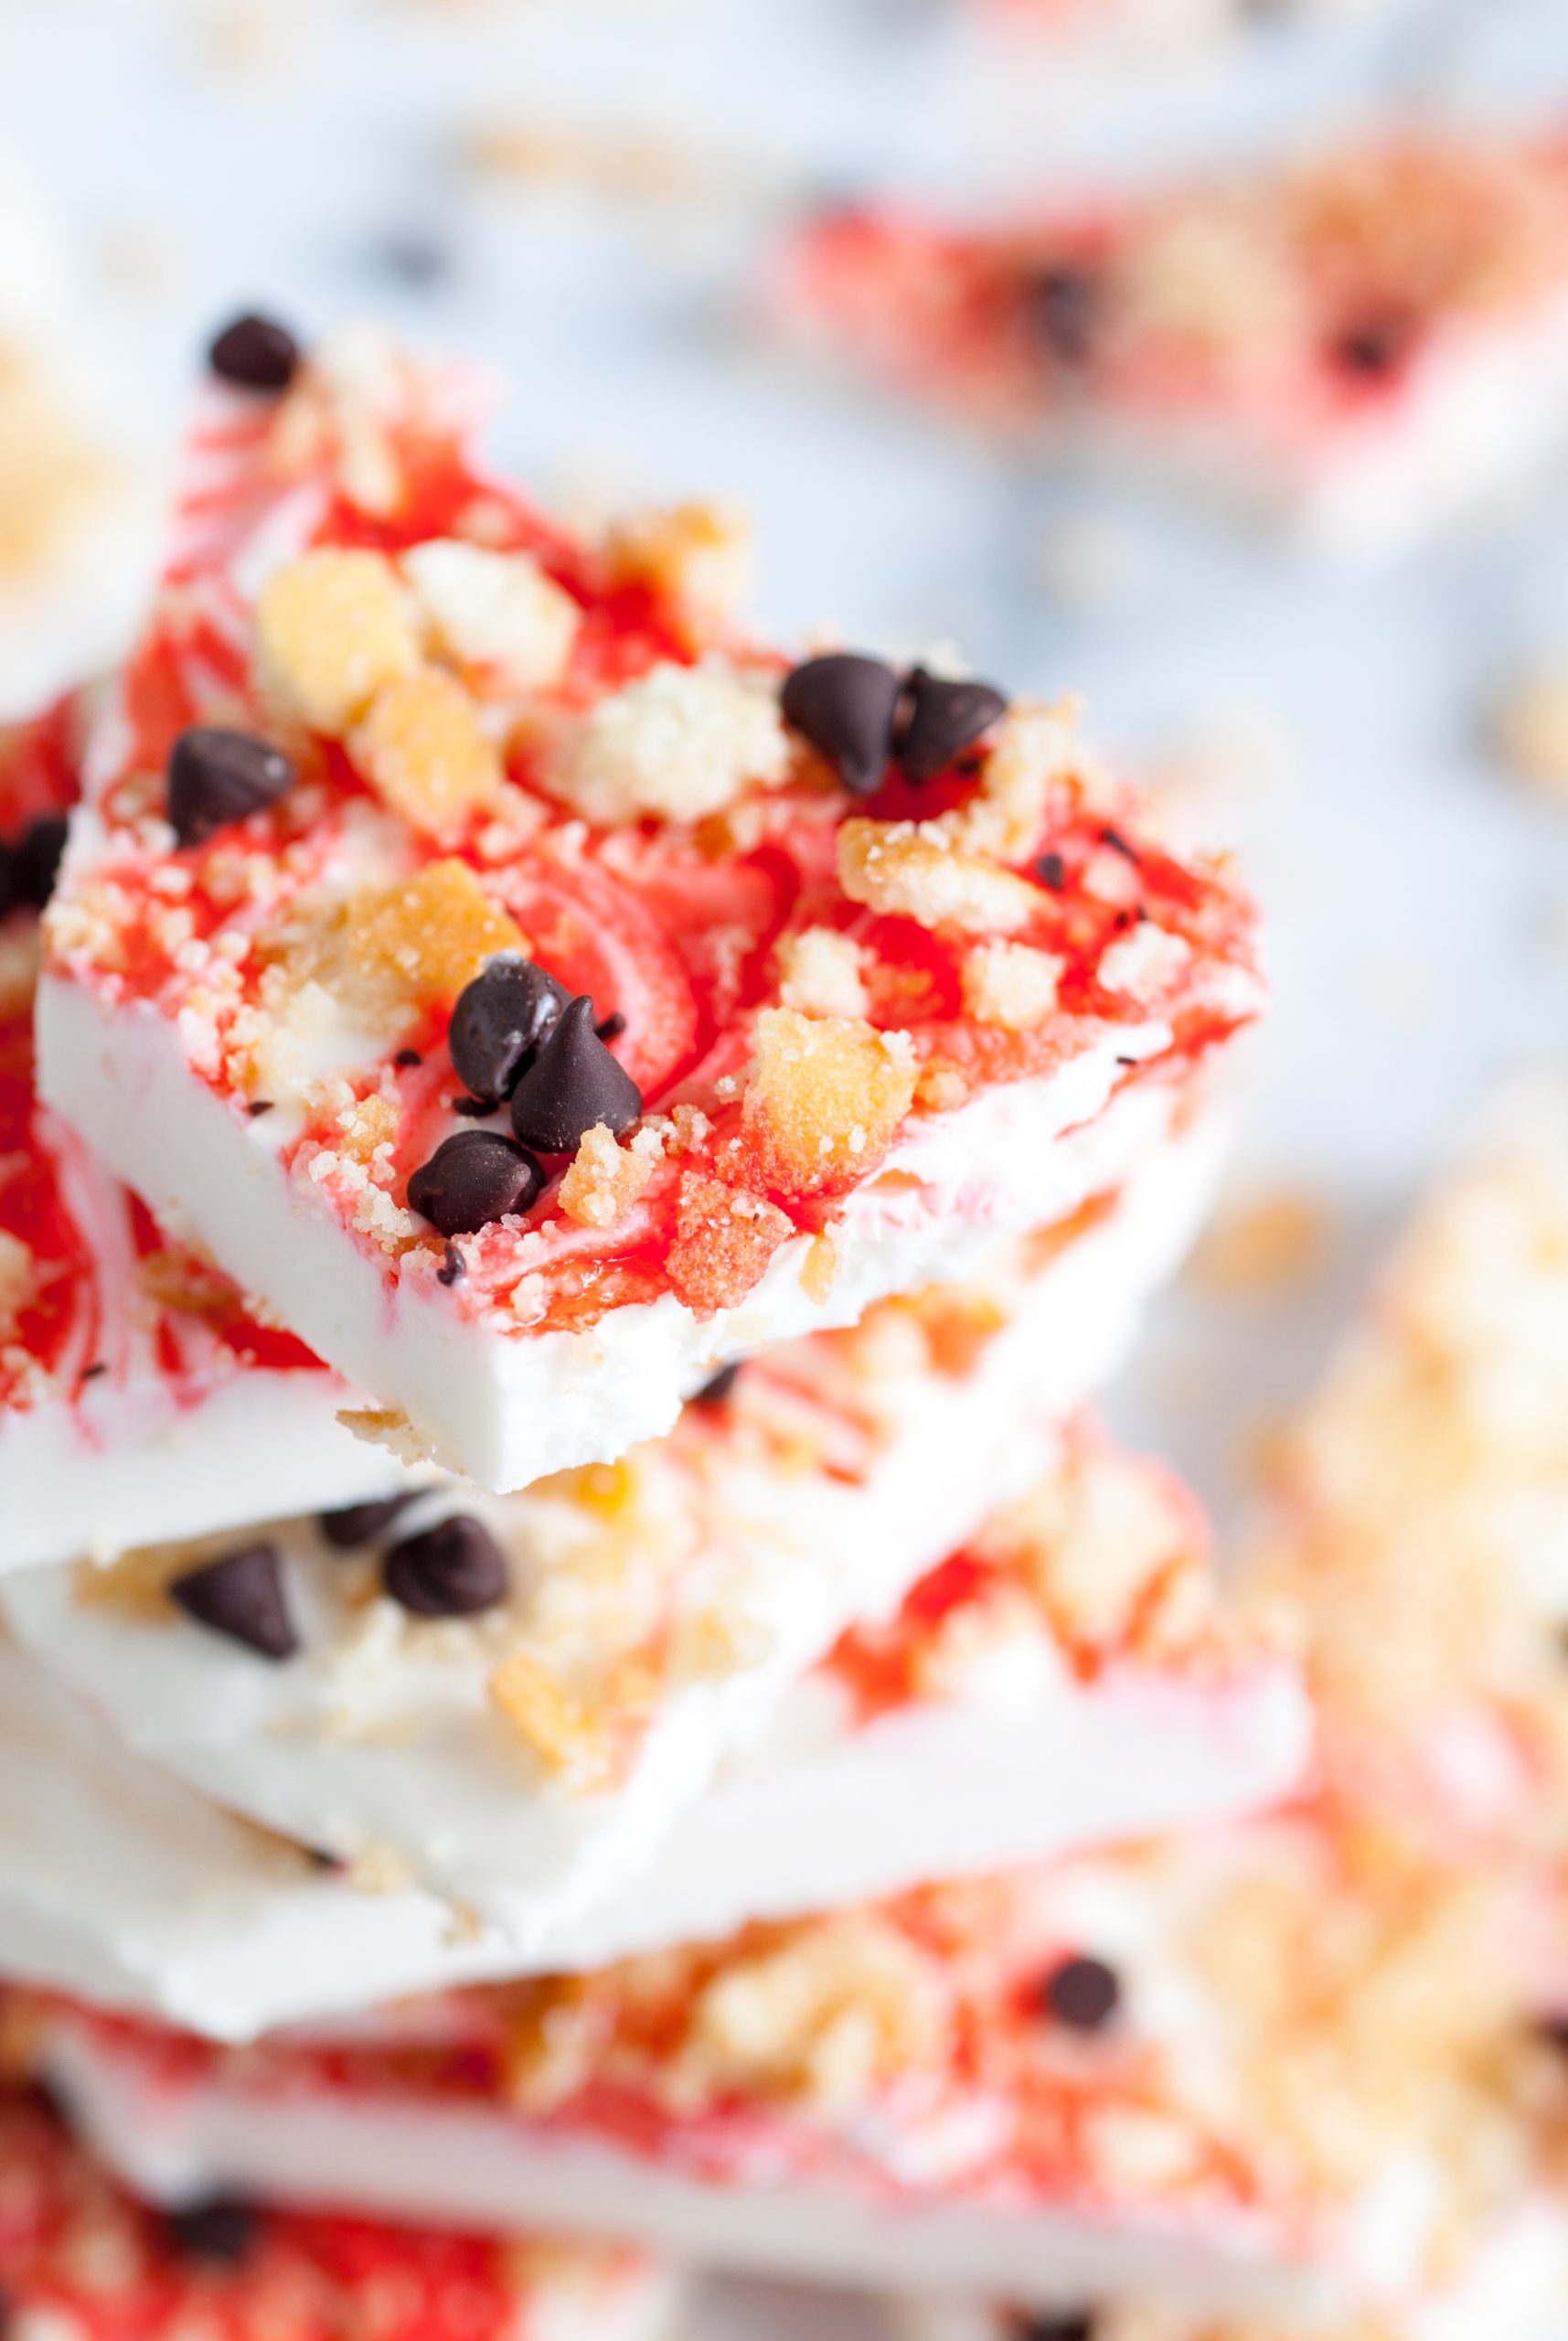 Close-up of a stack of strawberry yogurt bark topped with granola and chocolate chips on a white surface. The yogurt has a marbled red and white appearance.